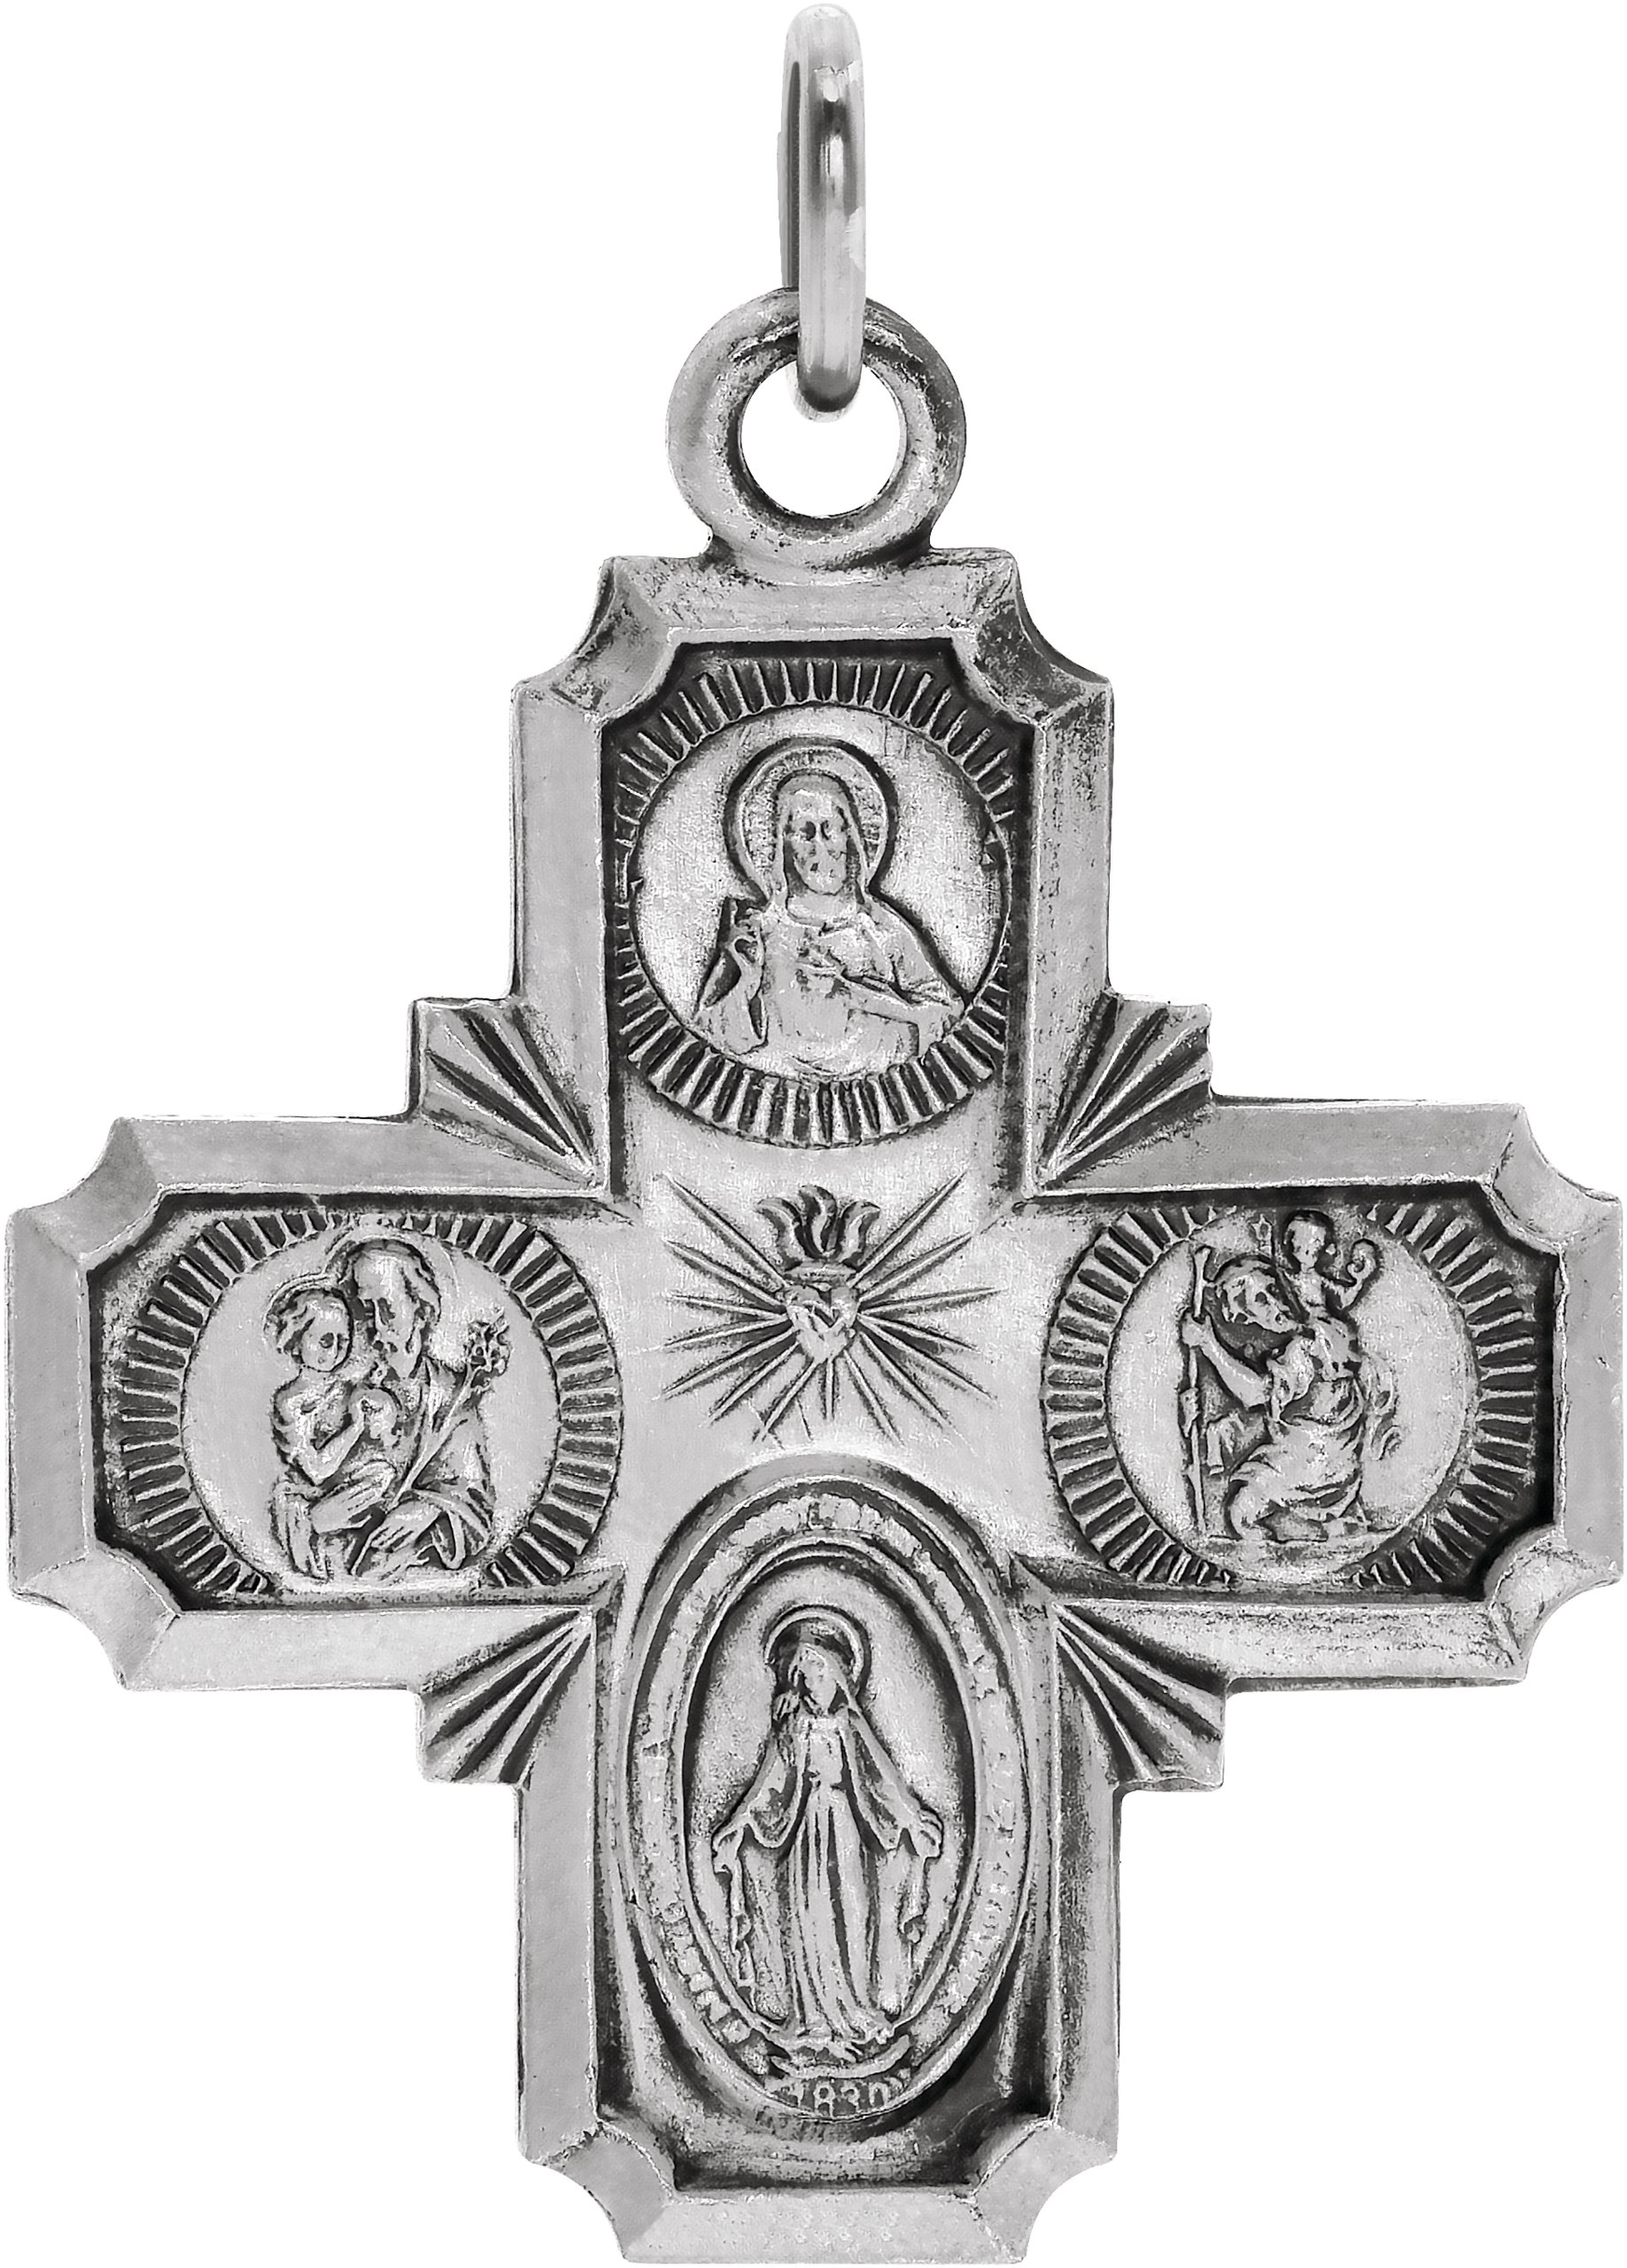 Sterling Silver 30x29 mm Four Way Cross Medal